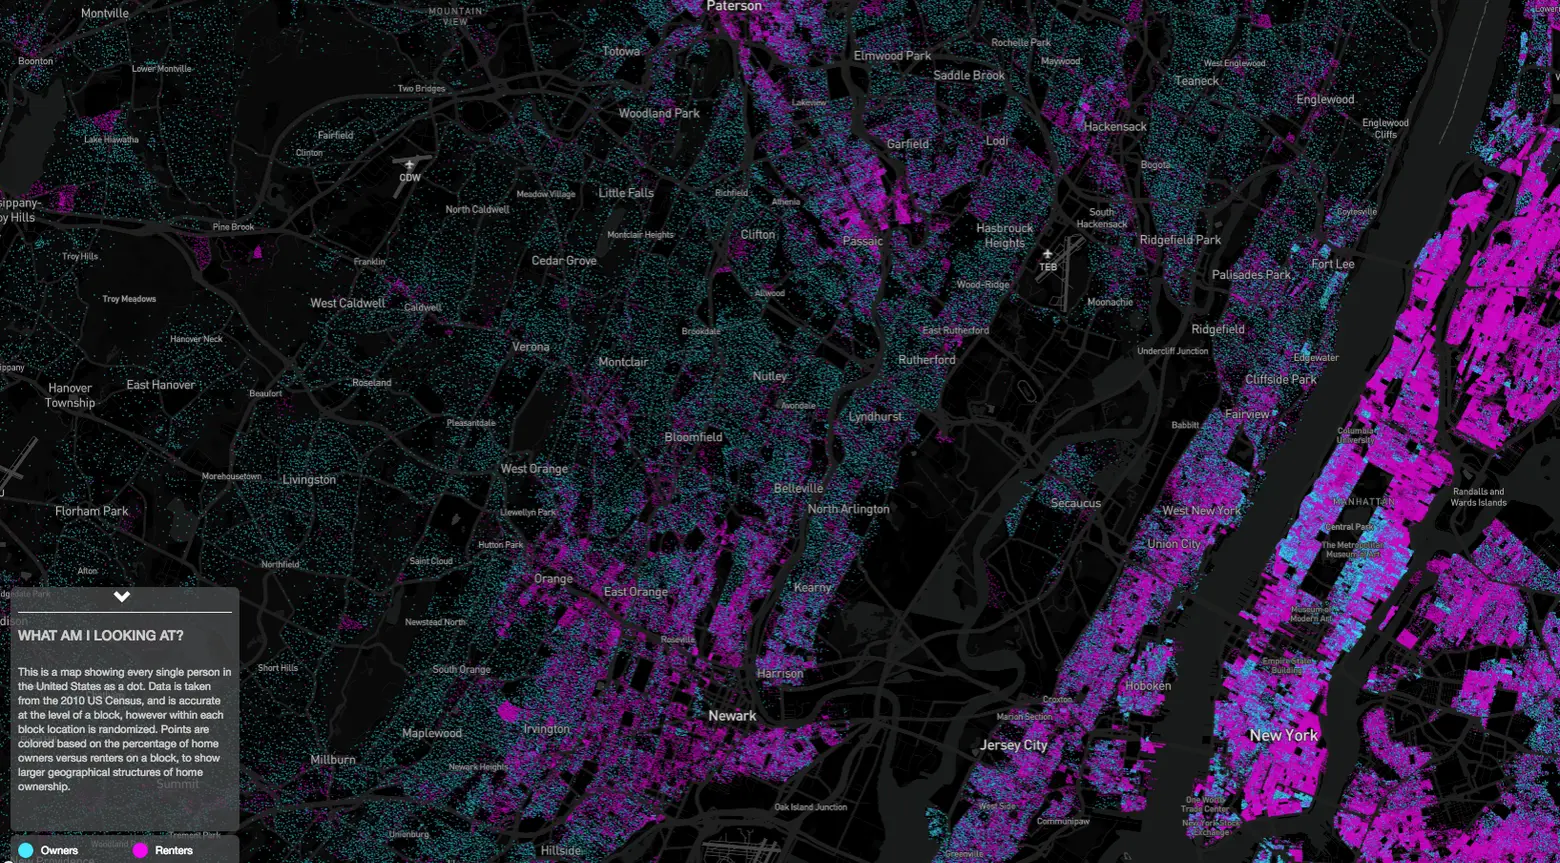 maps, real estate, renters, owners, demographics